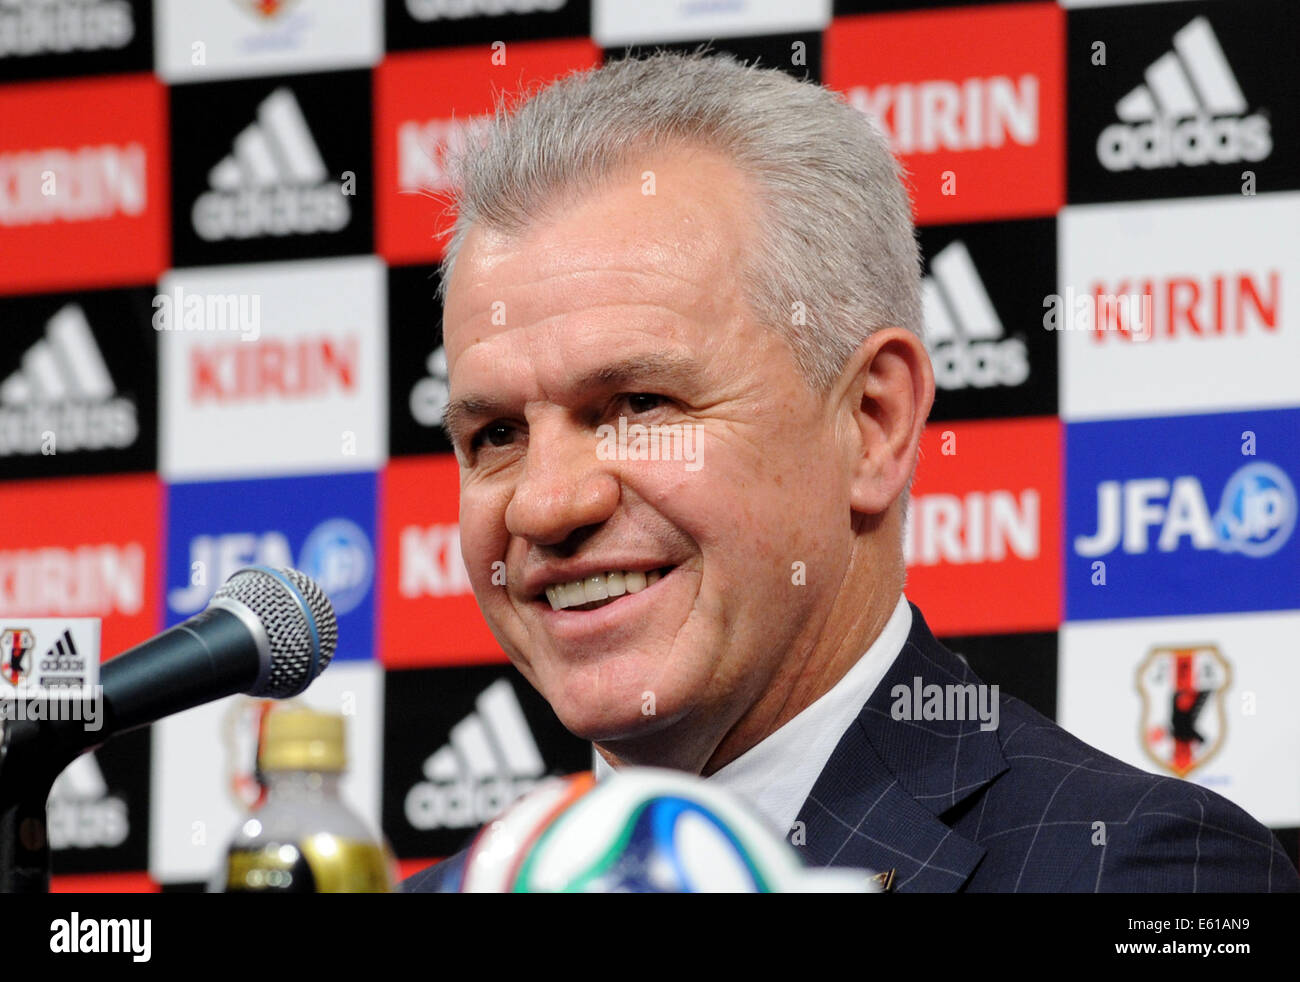 Tokyo, Japan. 11th Aug, 2014. Japan's new national football team head coach Javier Aguirre of Mexico attends a press conference in Tokyo, Japan, Aug. 11, 2014. Credit:  Stringer/Xinhua/Alamy Live News Stock Photo